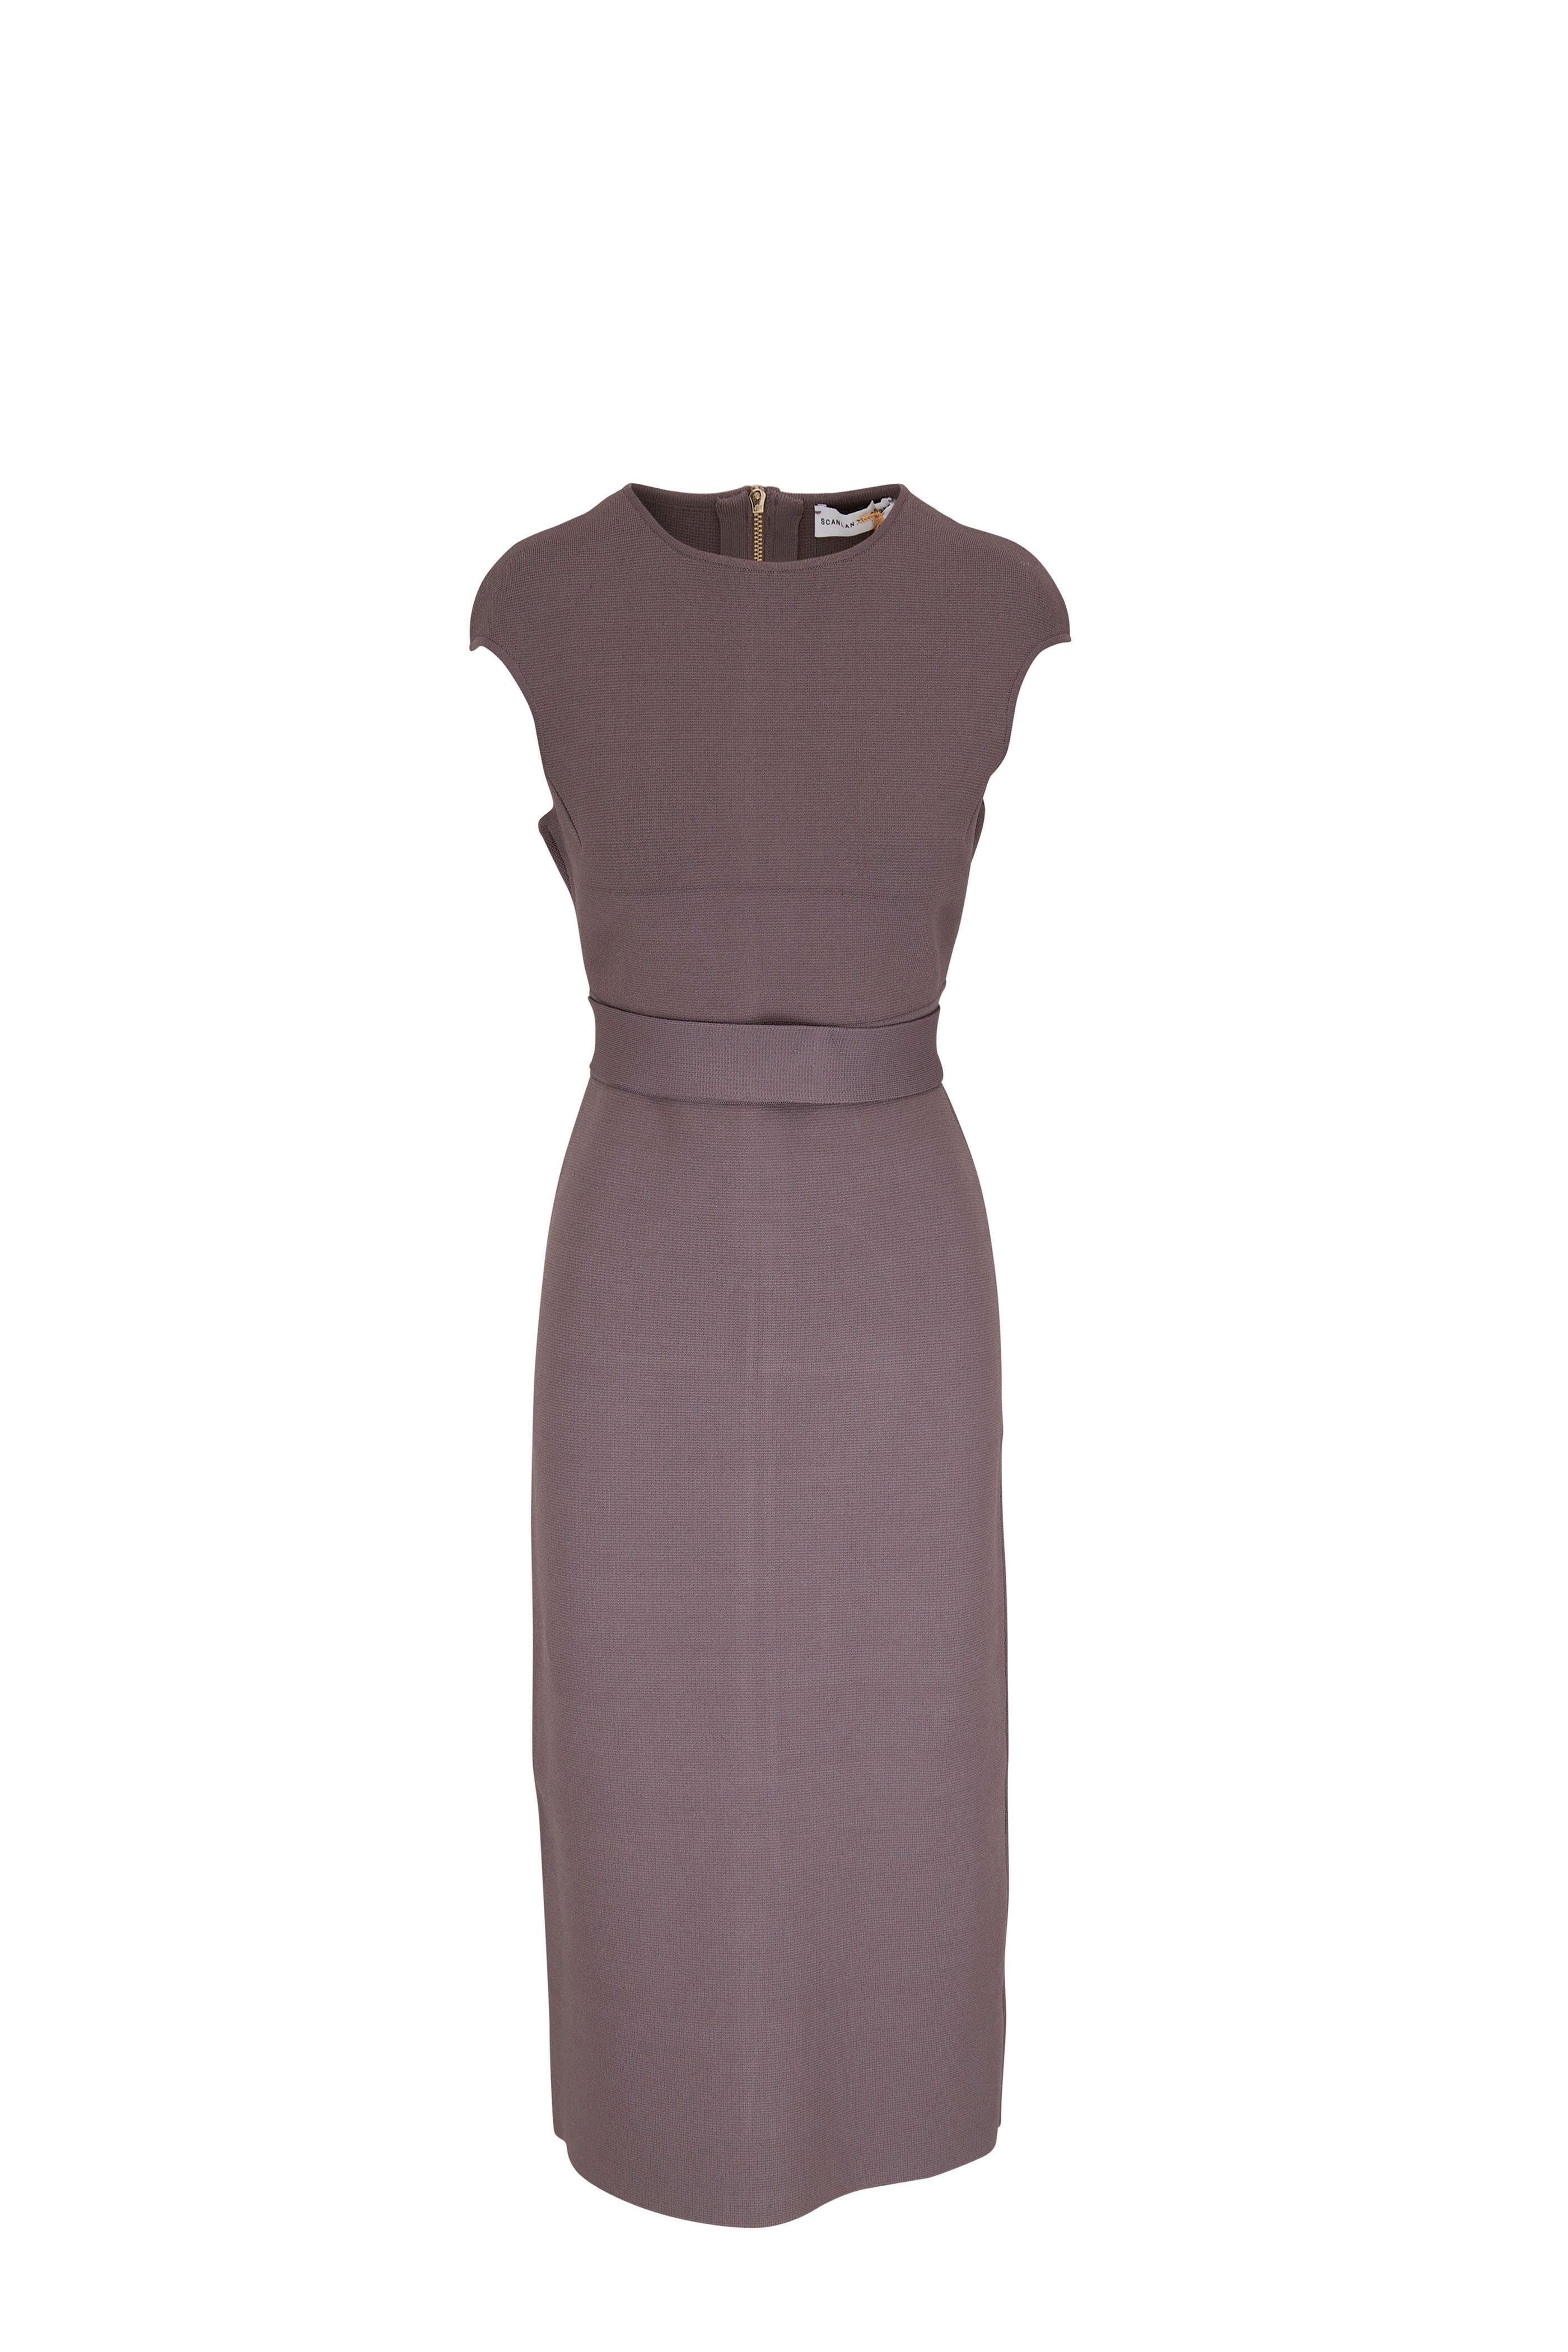 Scanlan Theodore - Taupe Crepe Knit Midi Dress | Mitchell Stores